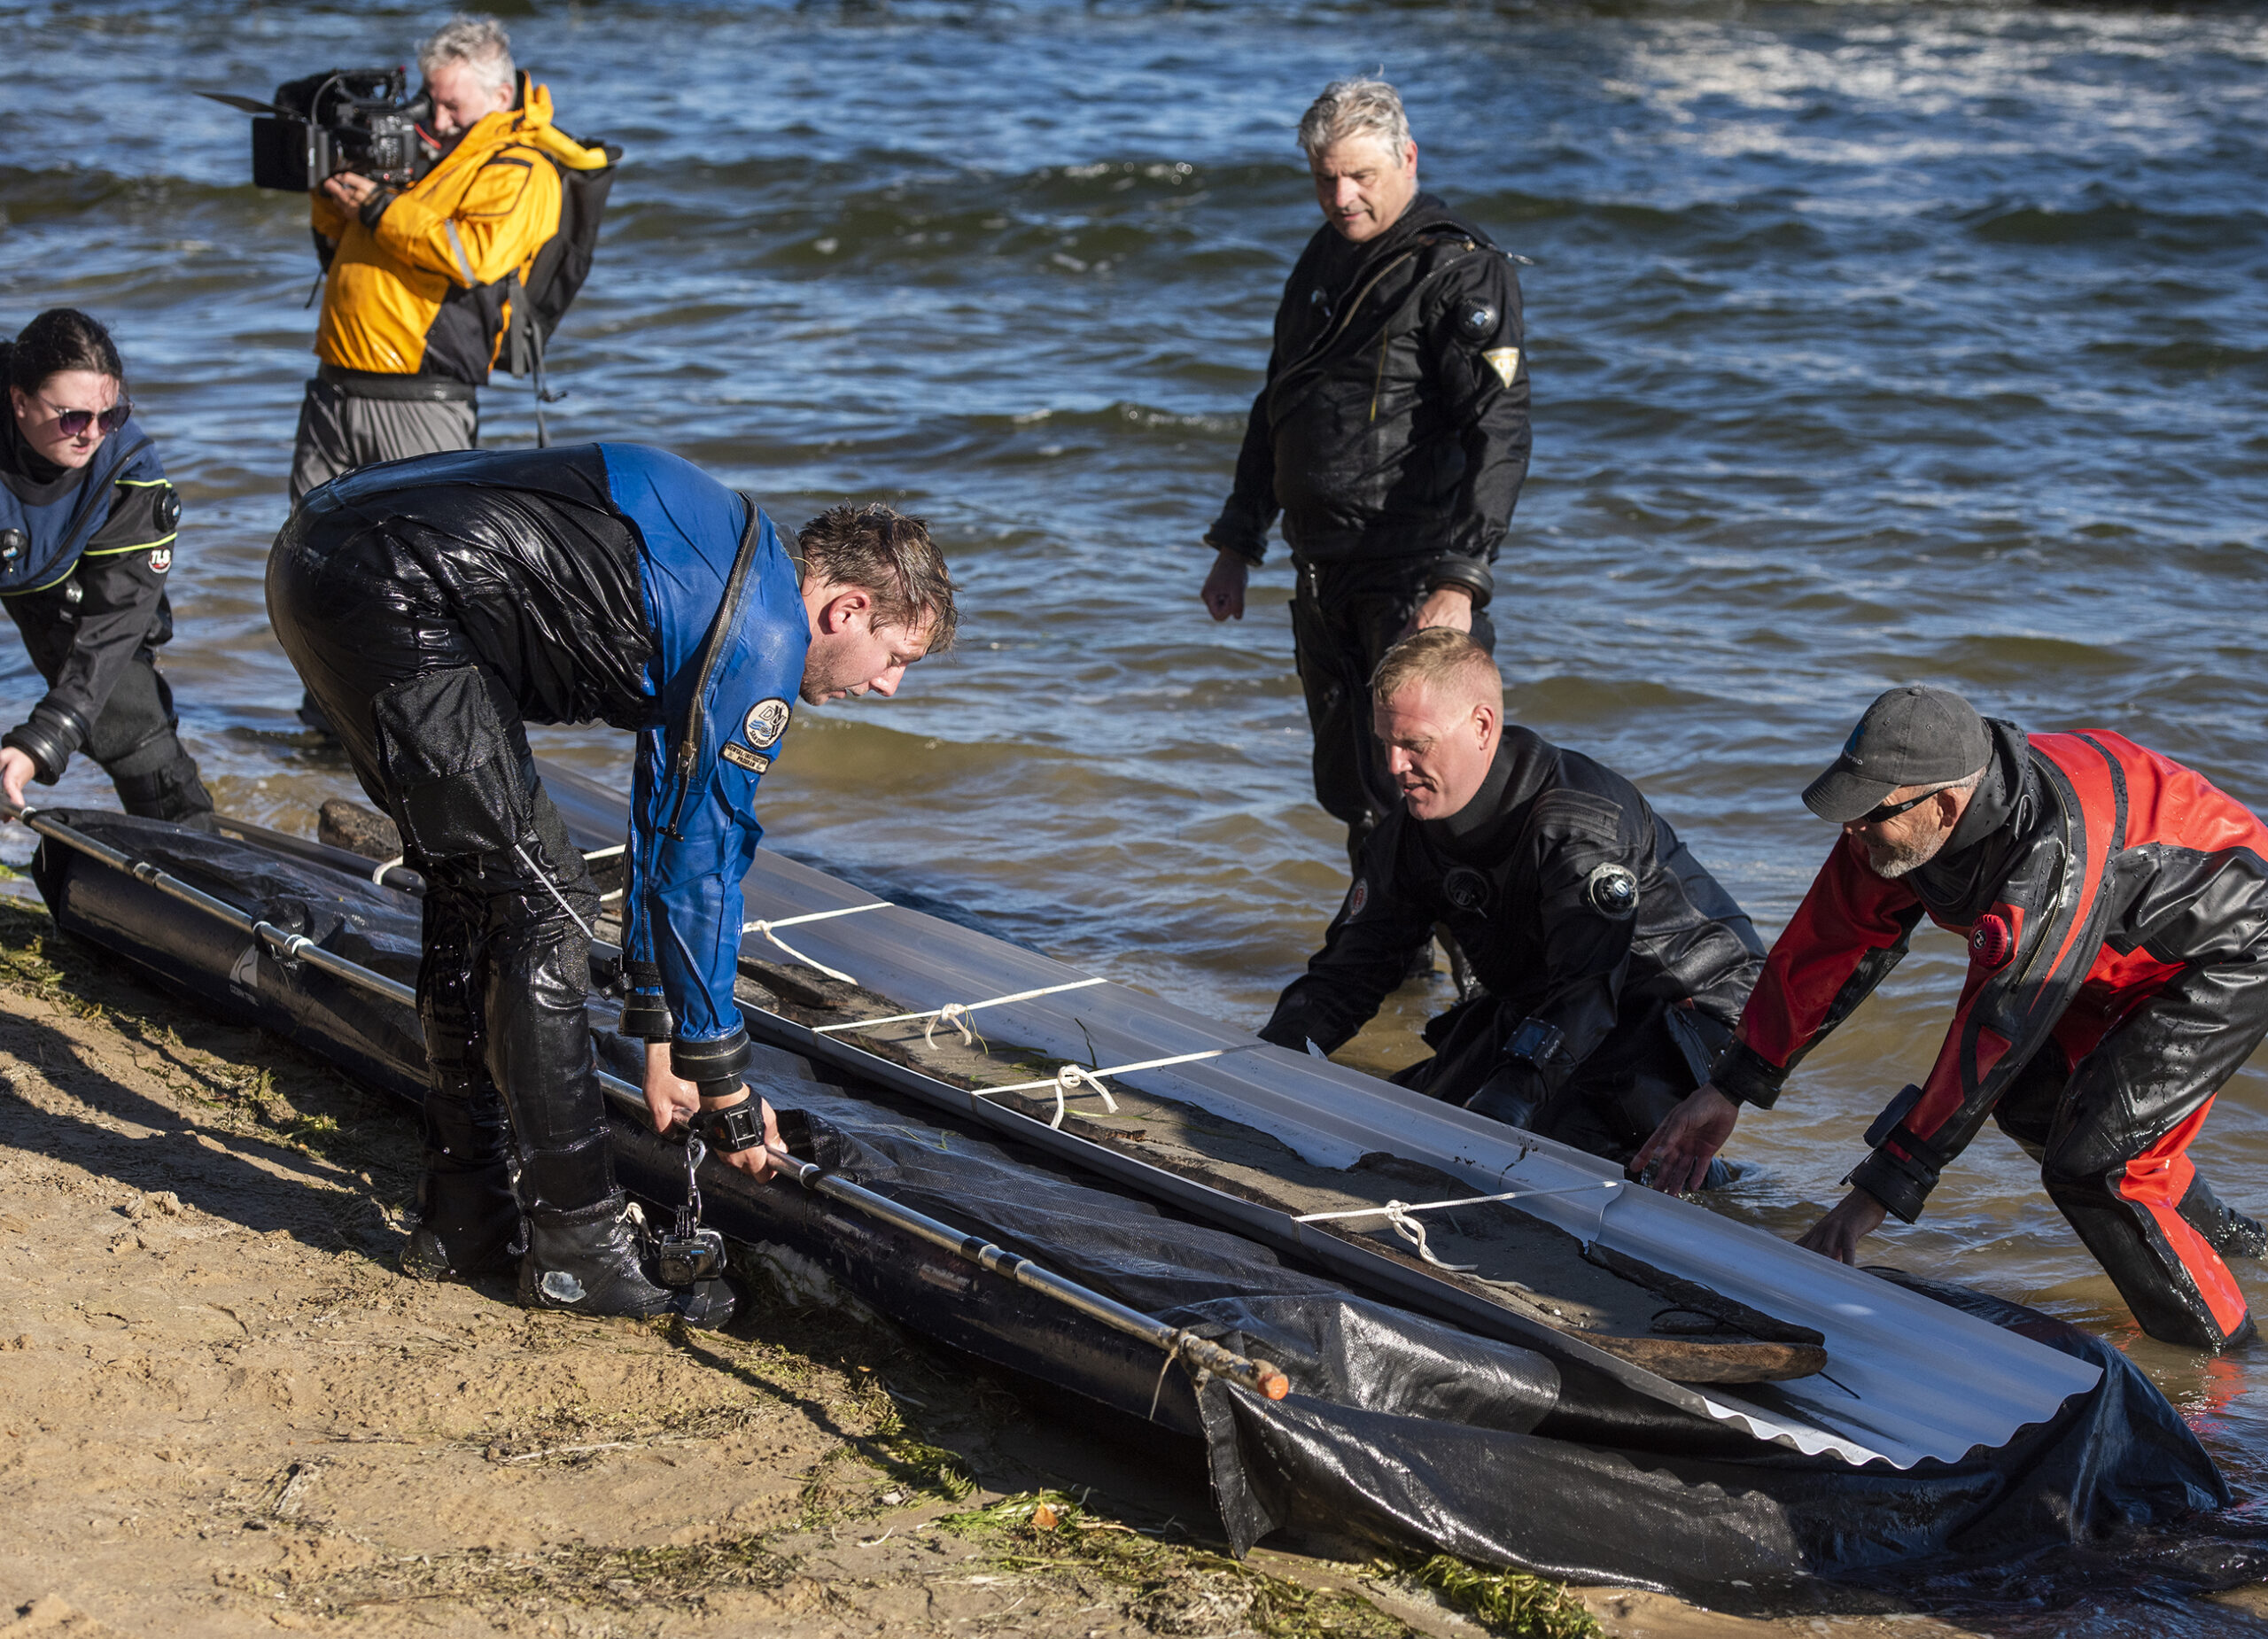 Crew members carefully place the canoe on the shore.